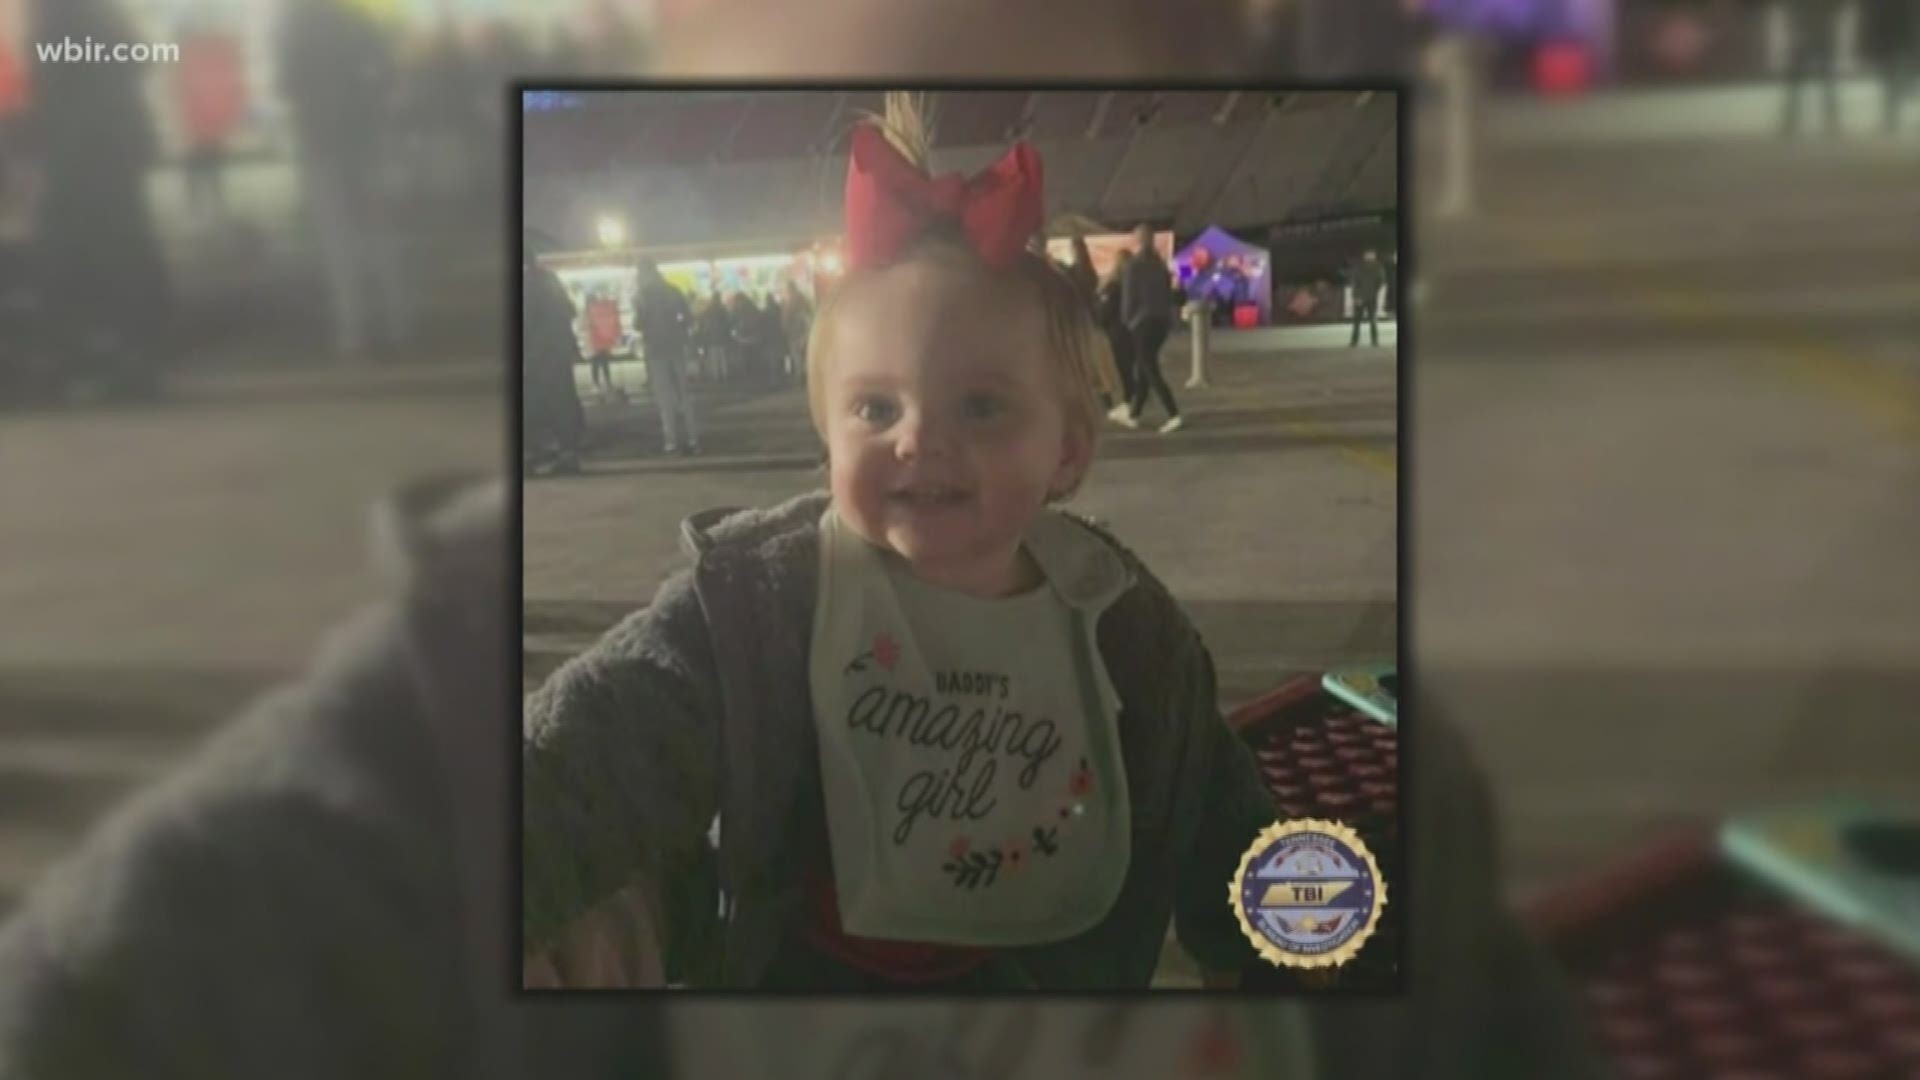 Evelyn Boswell of Sullivan County, a 15-month-old girl, was reported missing earlier this week.